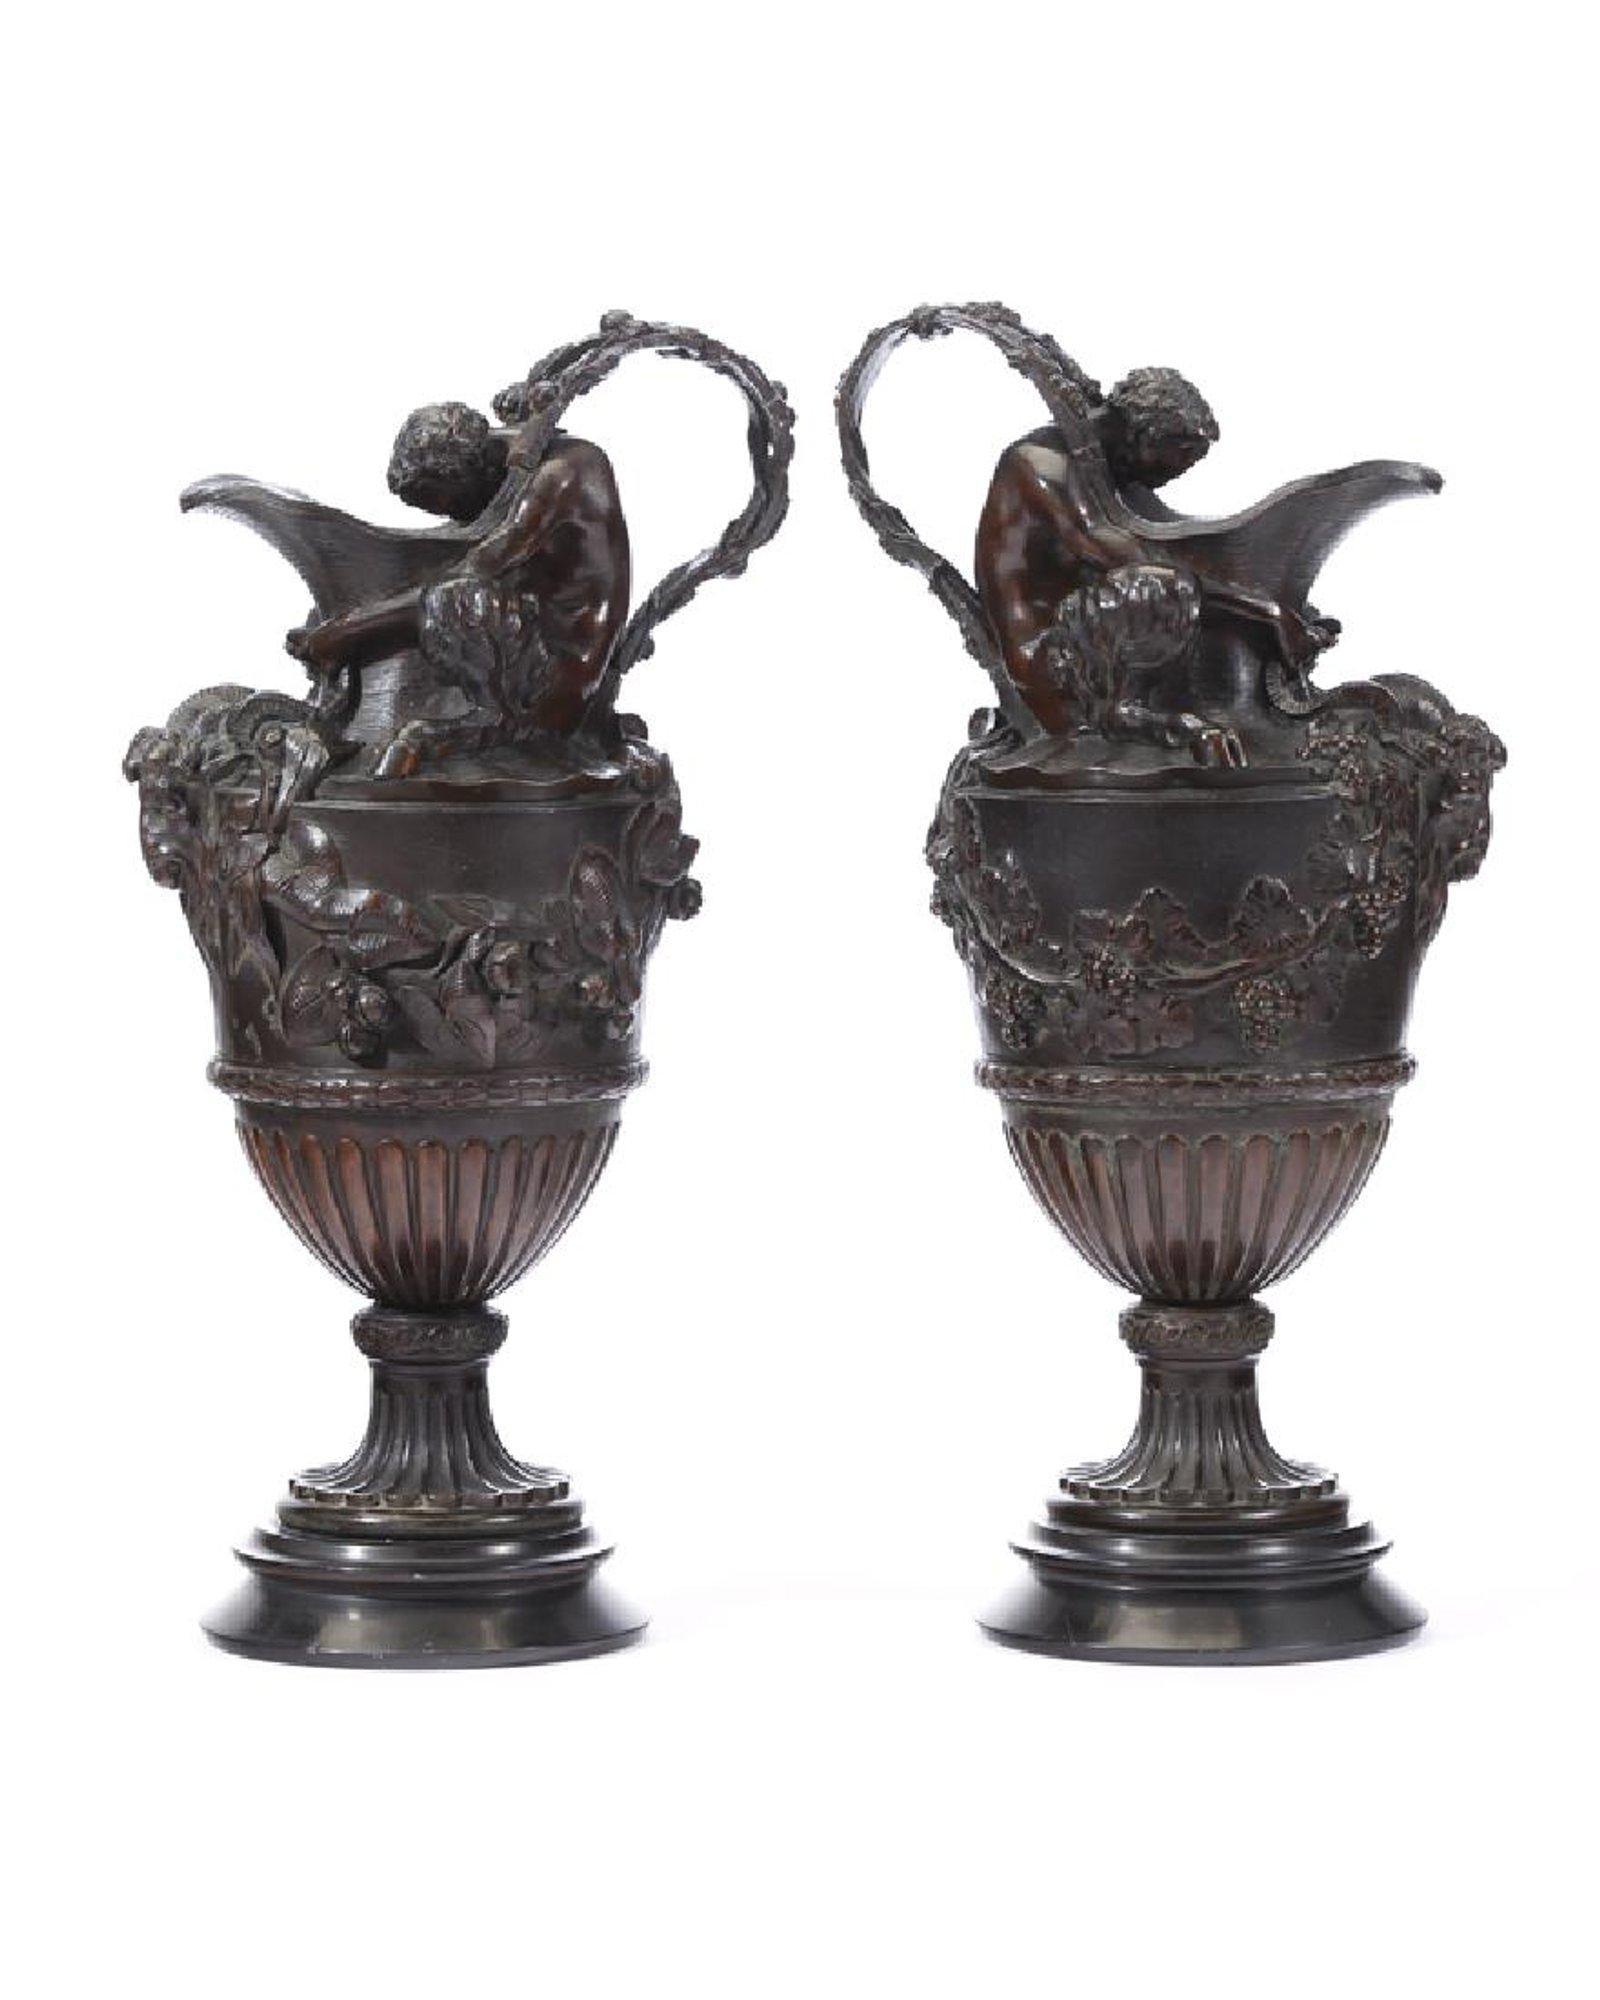 Exquisite pair of 19th century French patinated bronze urn ewers with figures. After Claude-Michel Clodion.

Each finely detailed ewer is surmounted by a seated Satyre embracing the neck, over a grotesque goat mask with intricate grape vine swags,